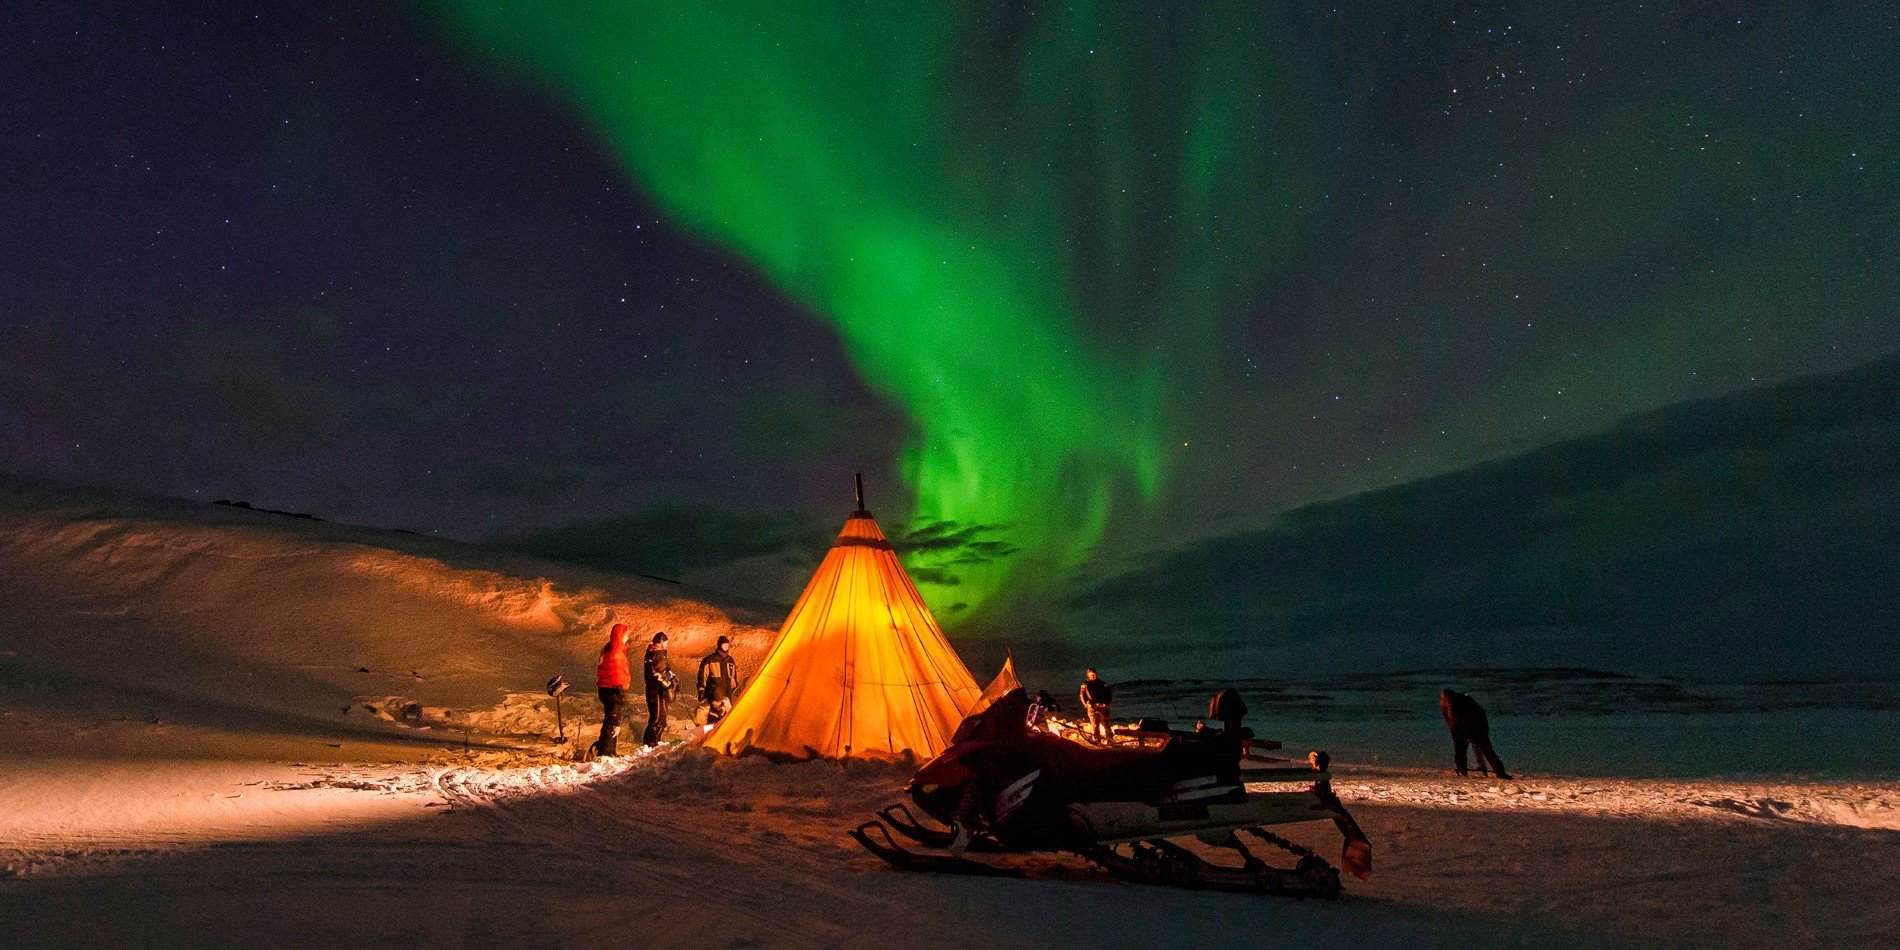 There are great chances of seeing the Northern Lights north of the Polar Circle